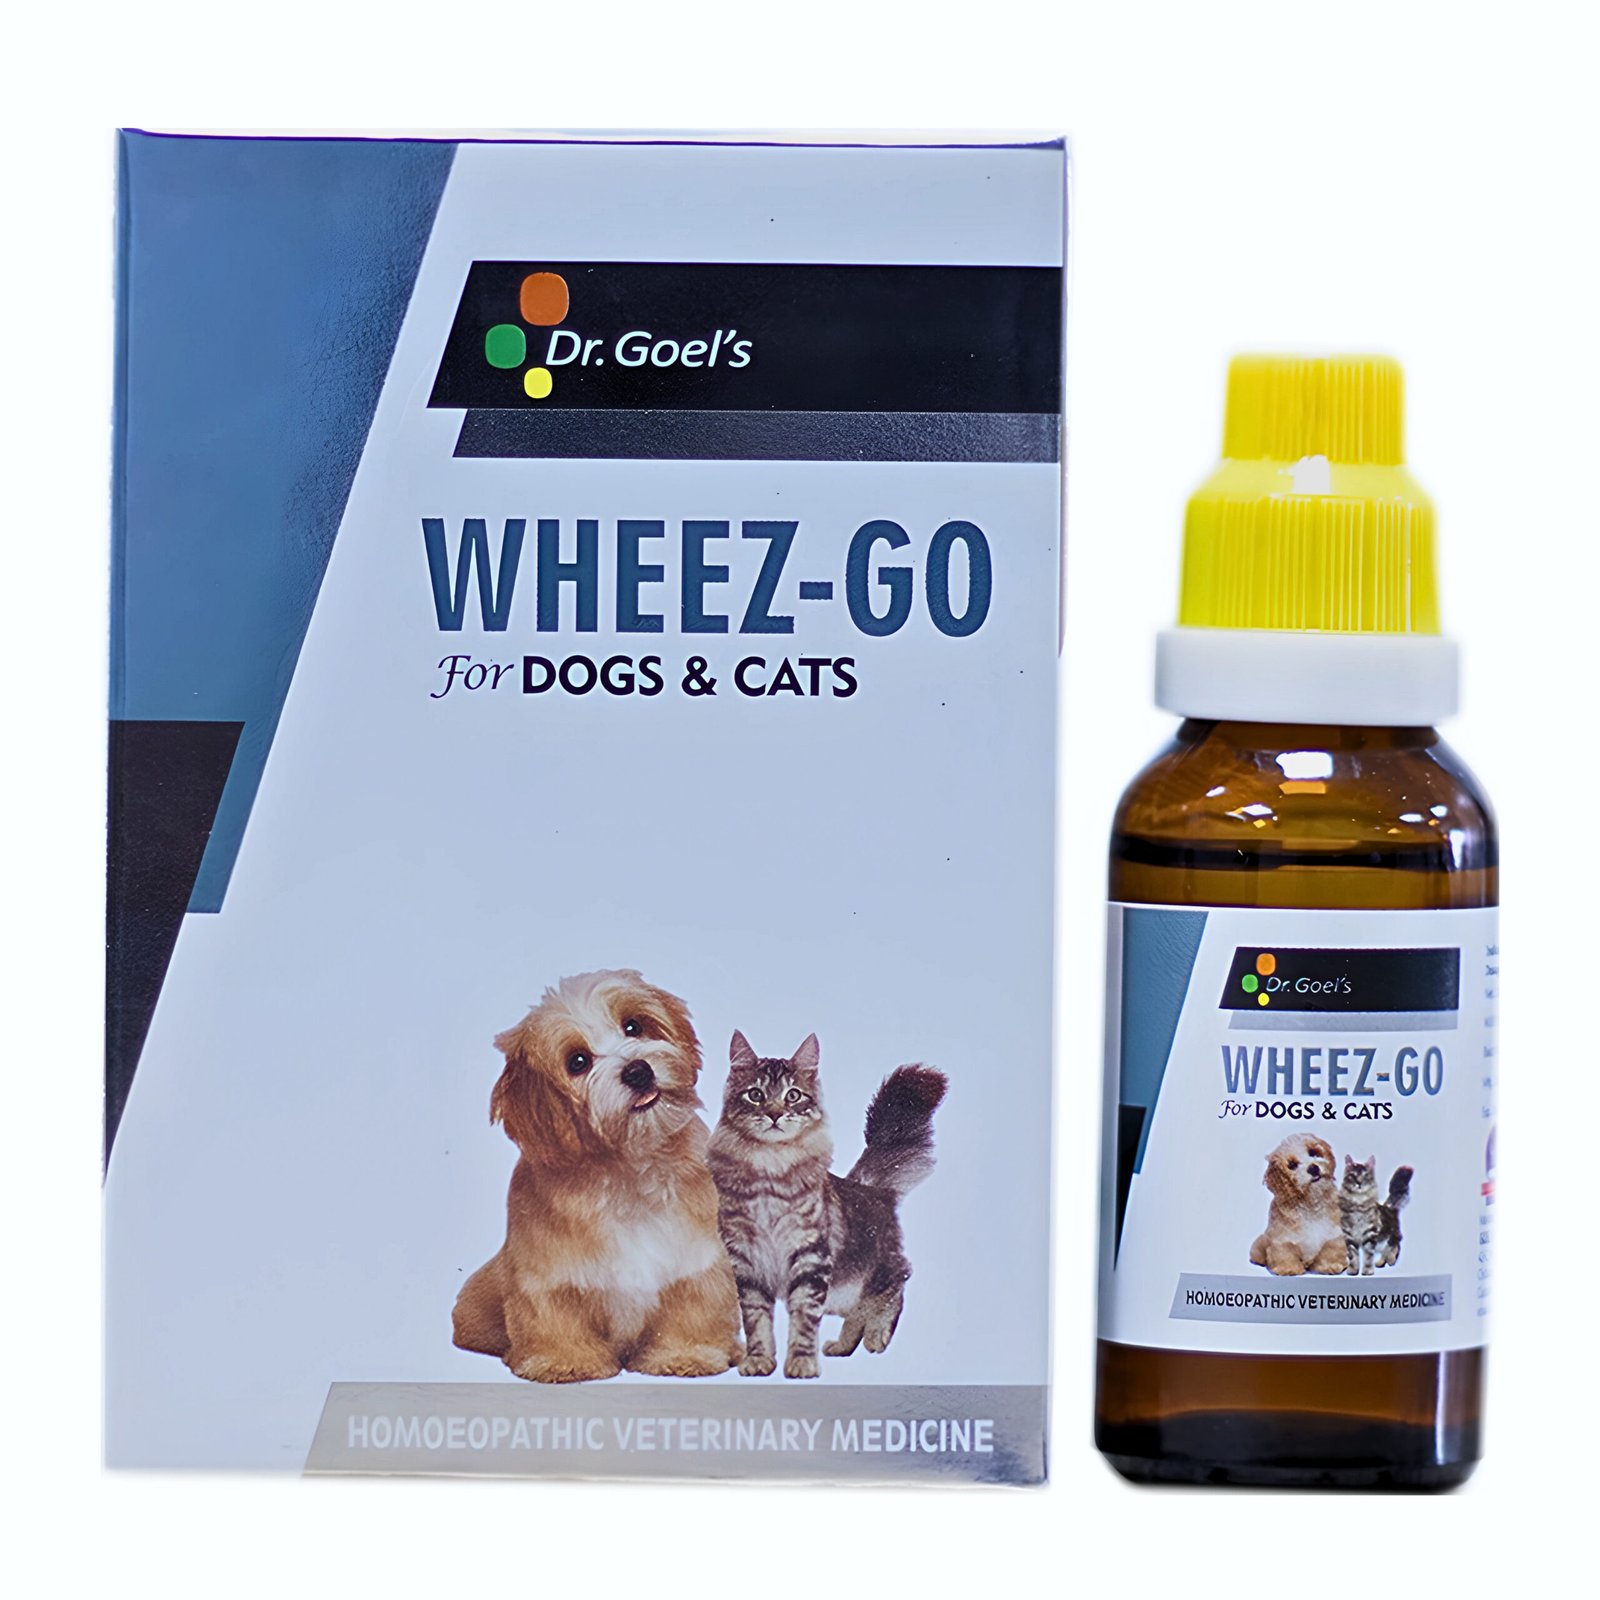 Wheez-go homeopathic medicine for pets